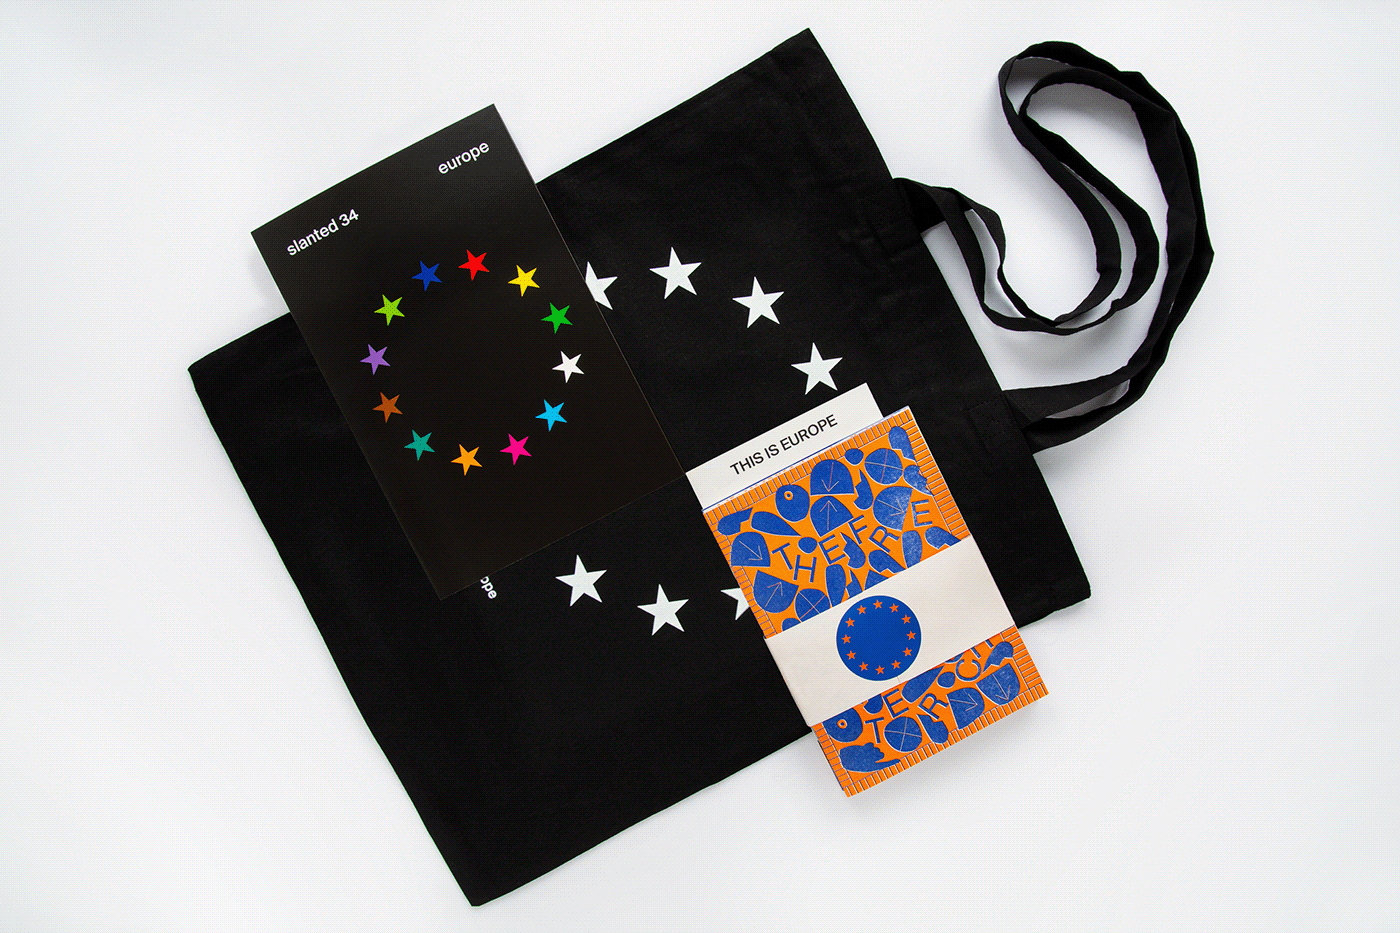 Tote bag, Slanted Magazine 34 and Special Limited Edition Fanzine pack